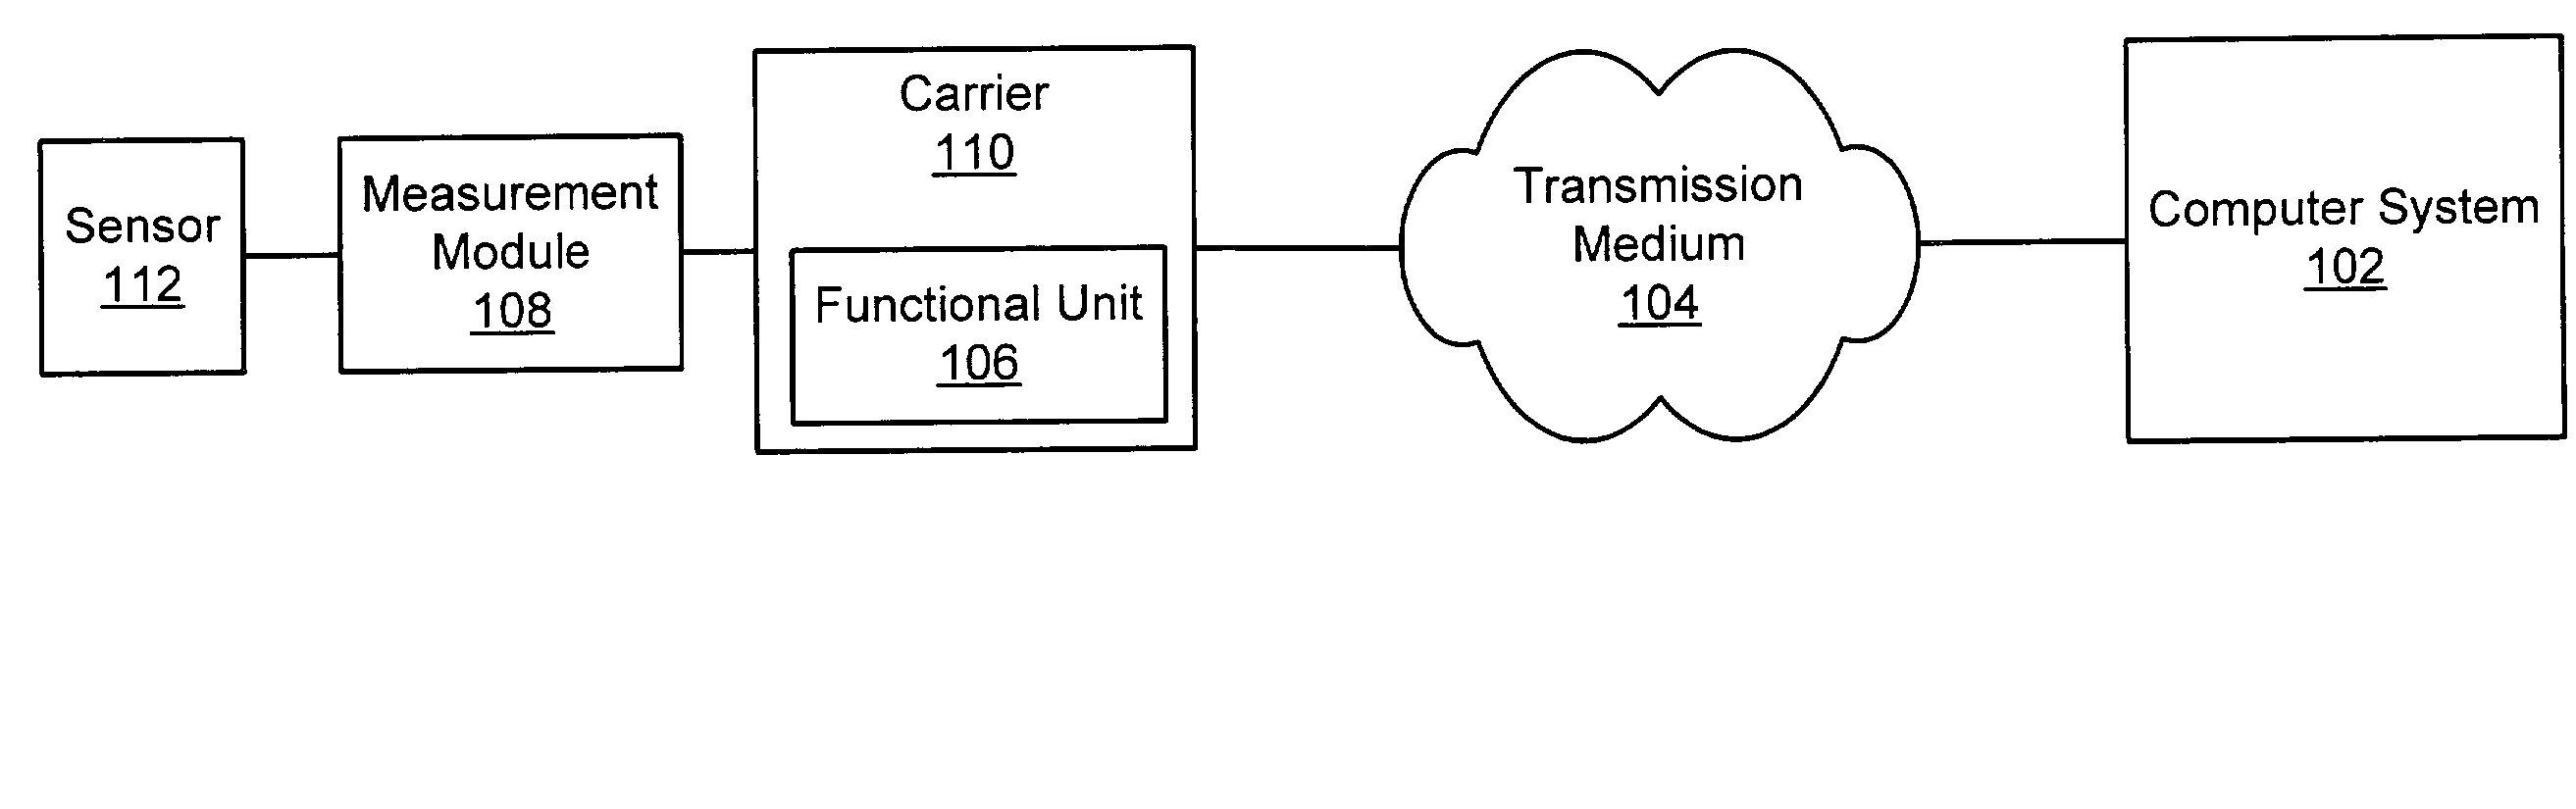 Measurement system with modular measurement modules that convey interface information